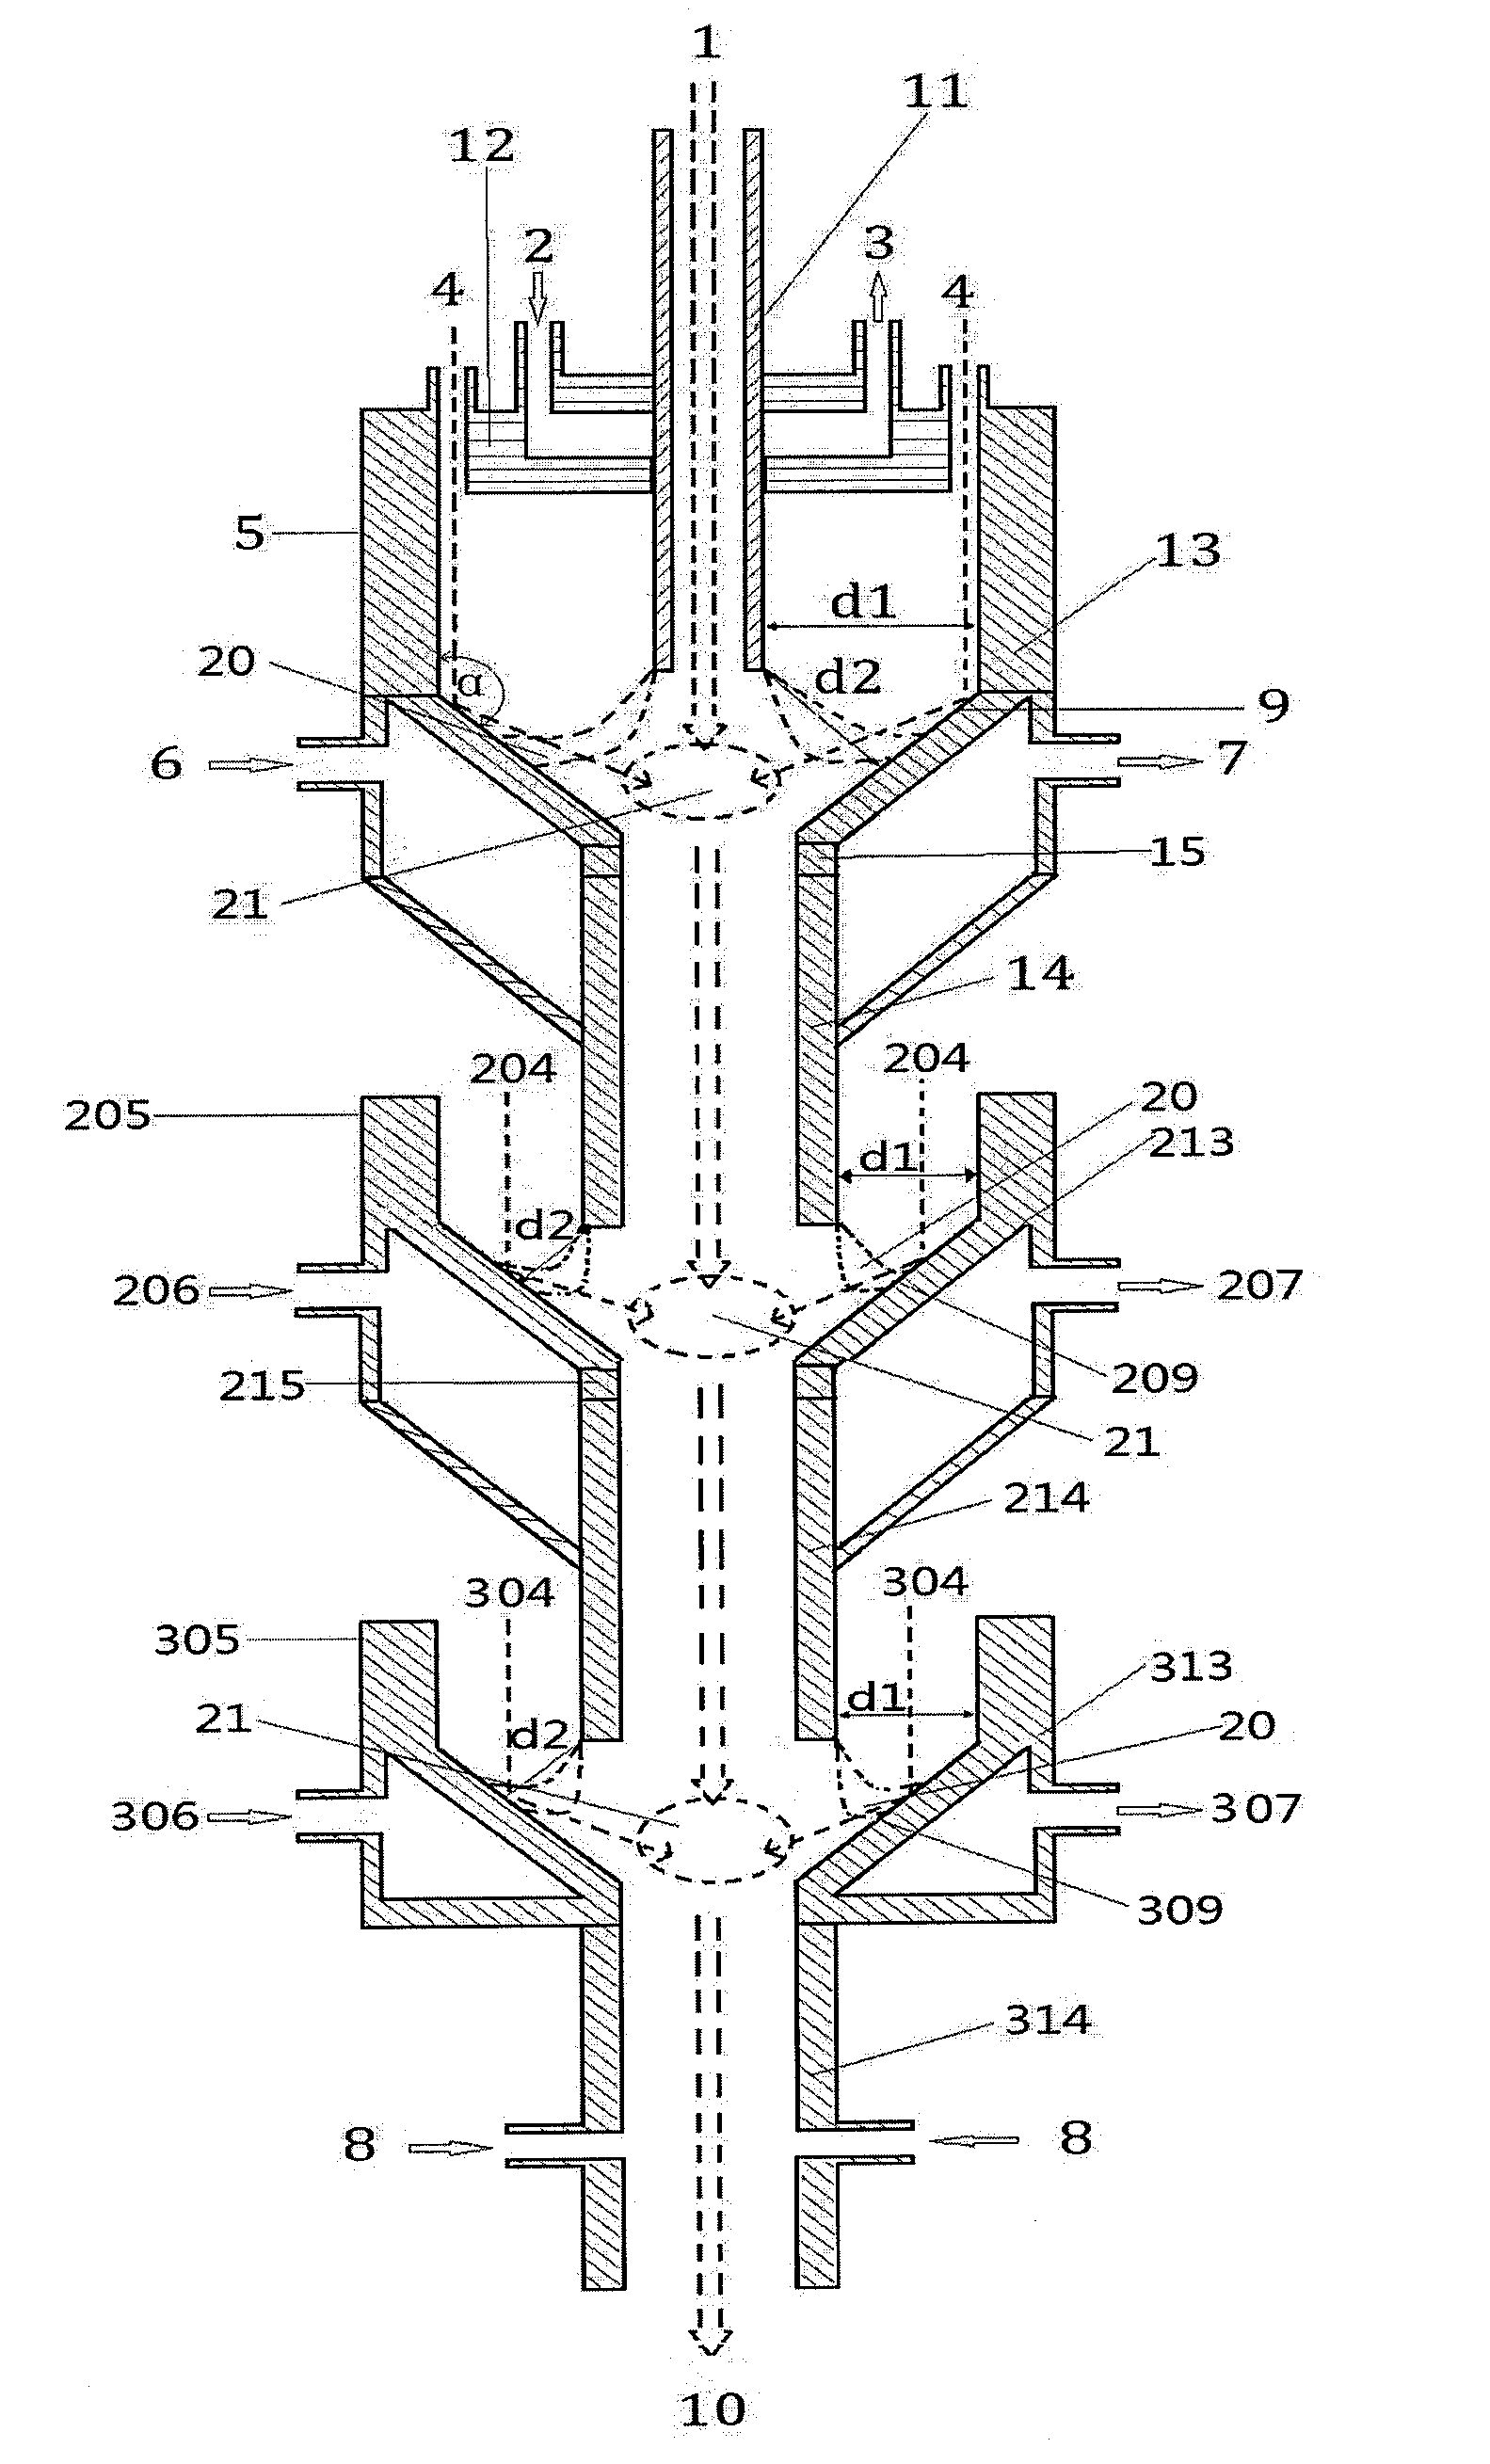 Multi-stage plasma reactor system with hollow cathodes for cracking carbonaceous material